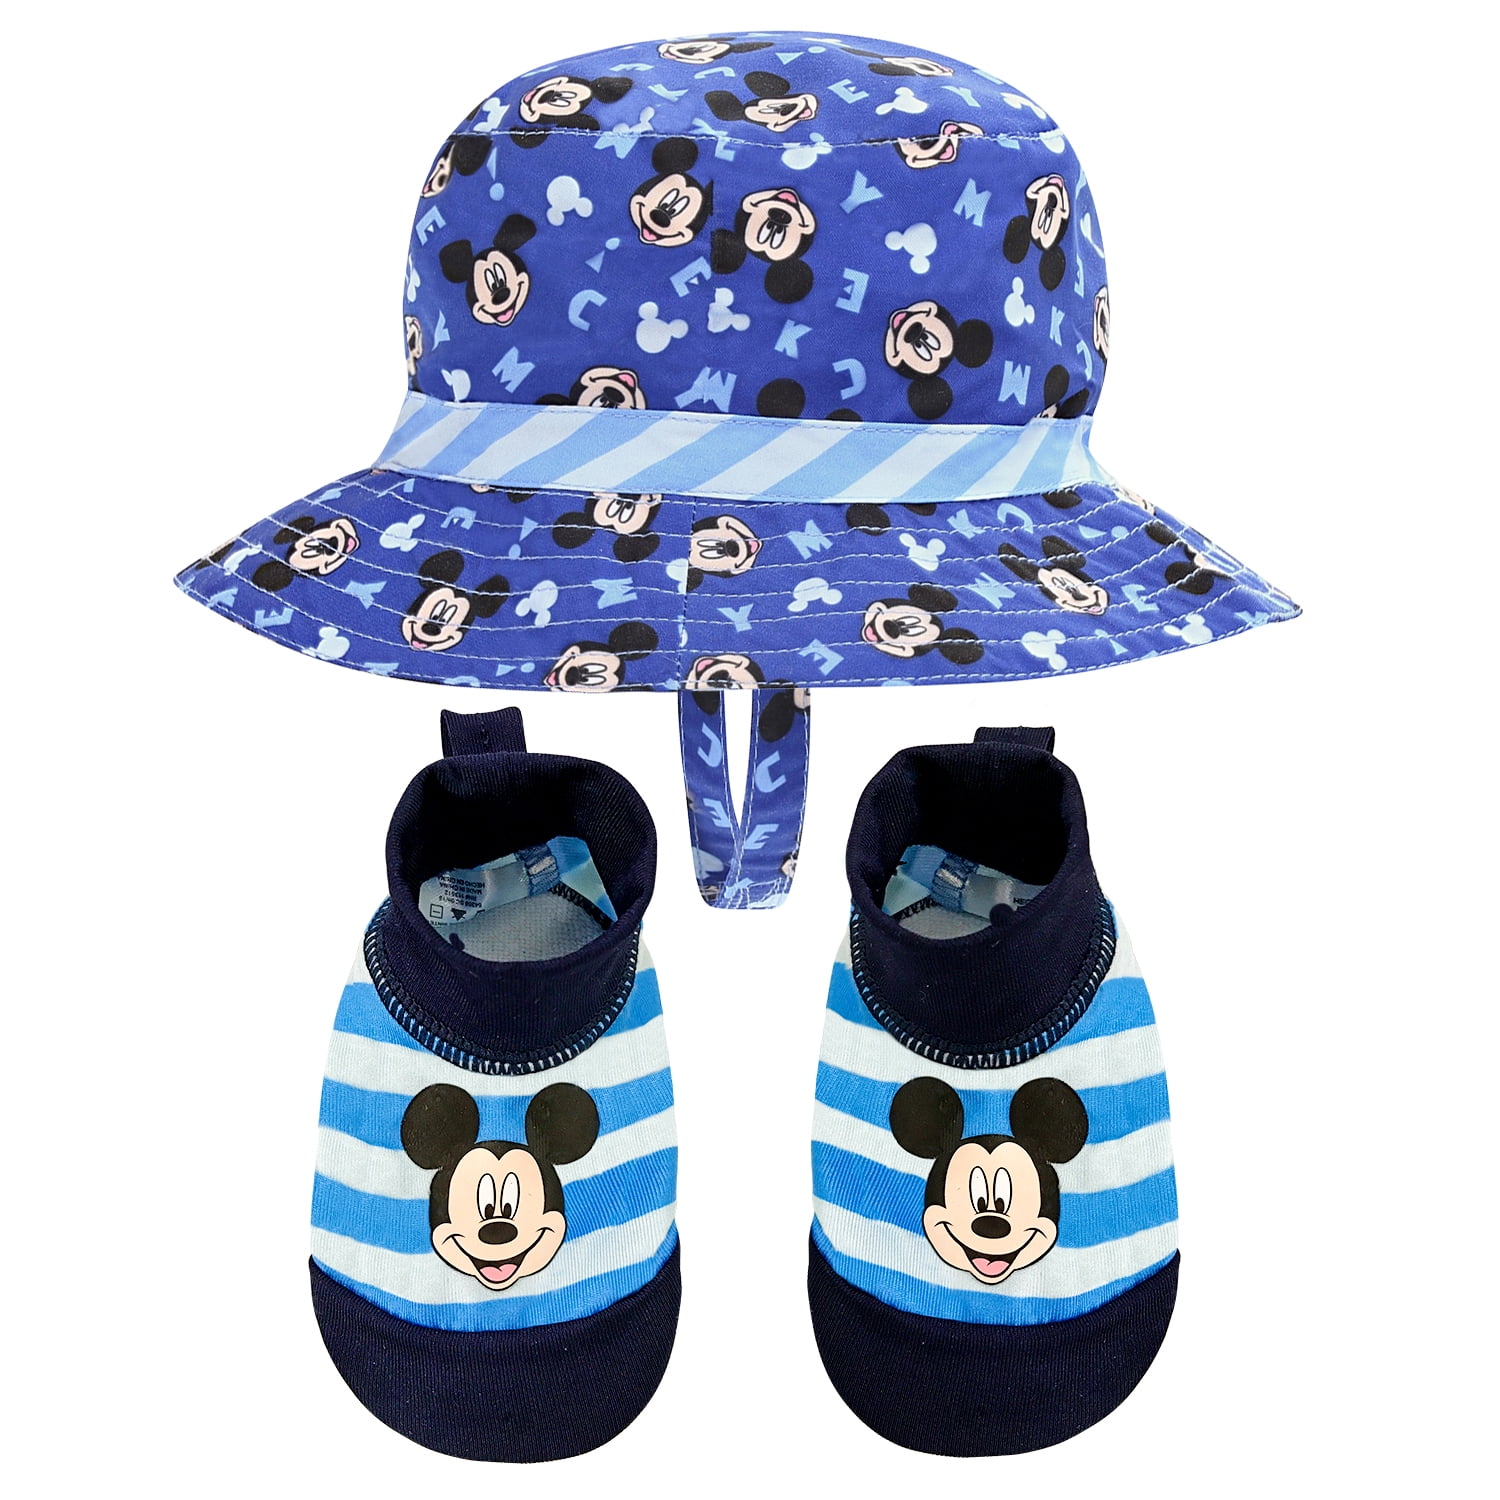 0-6 Months Booties /& Mittens Set Blue Disney Baby Mickey Mouse 3-Piece Cap